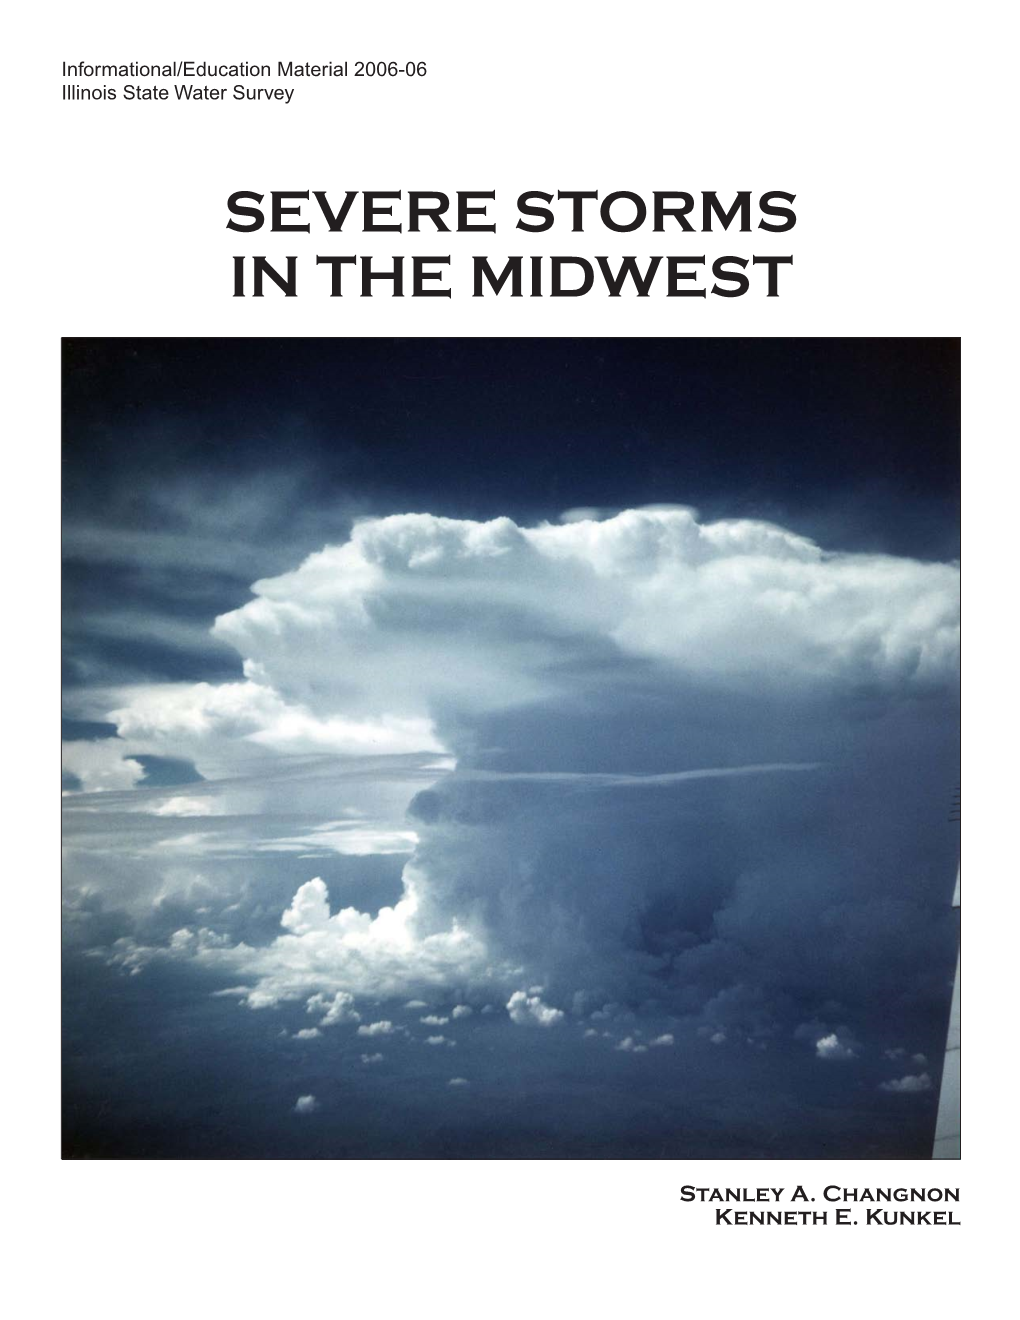 Severe Storms in the Midwest